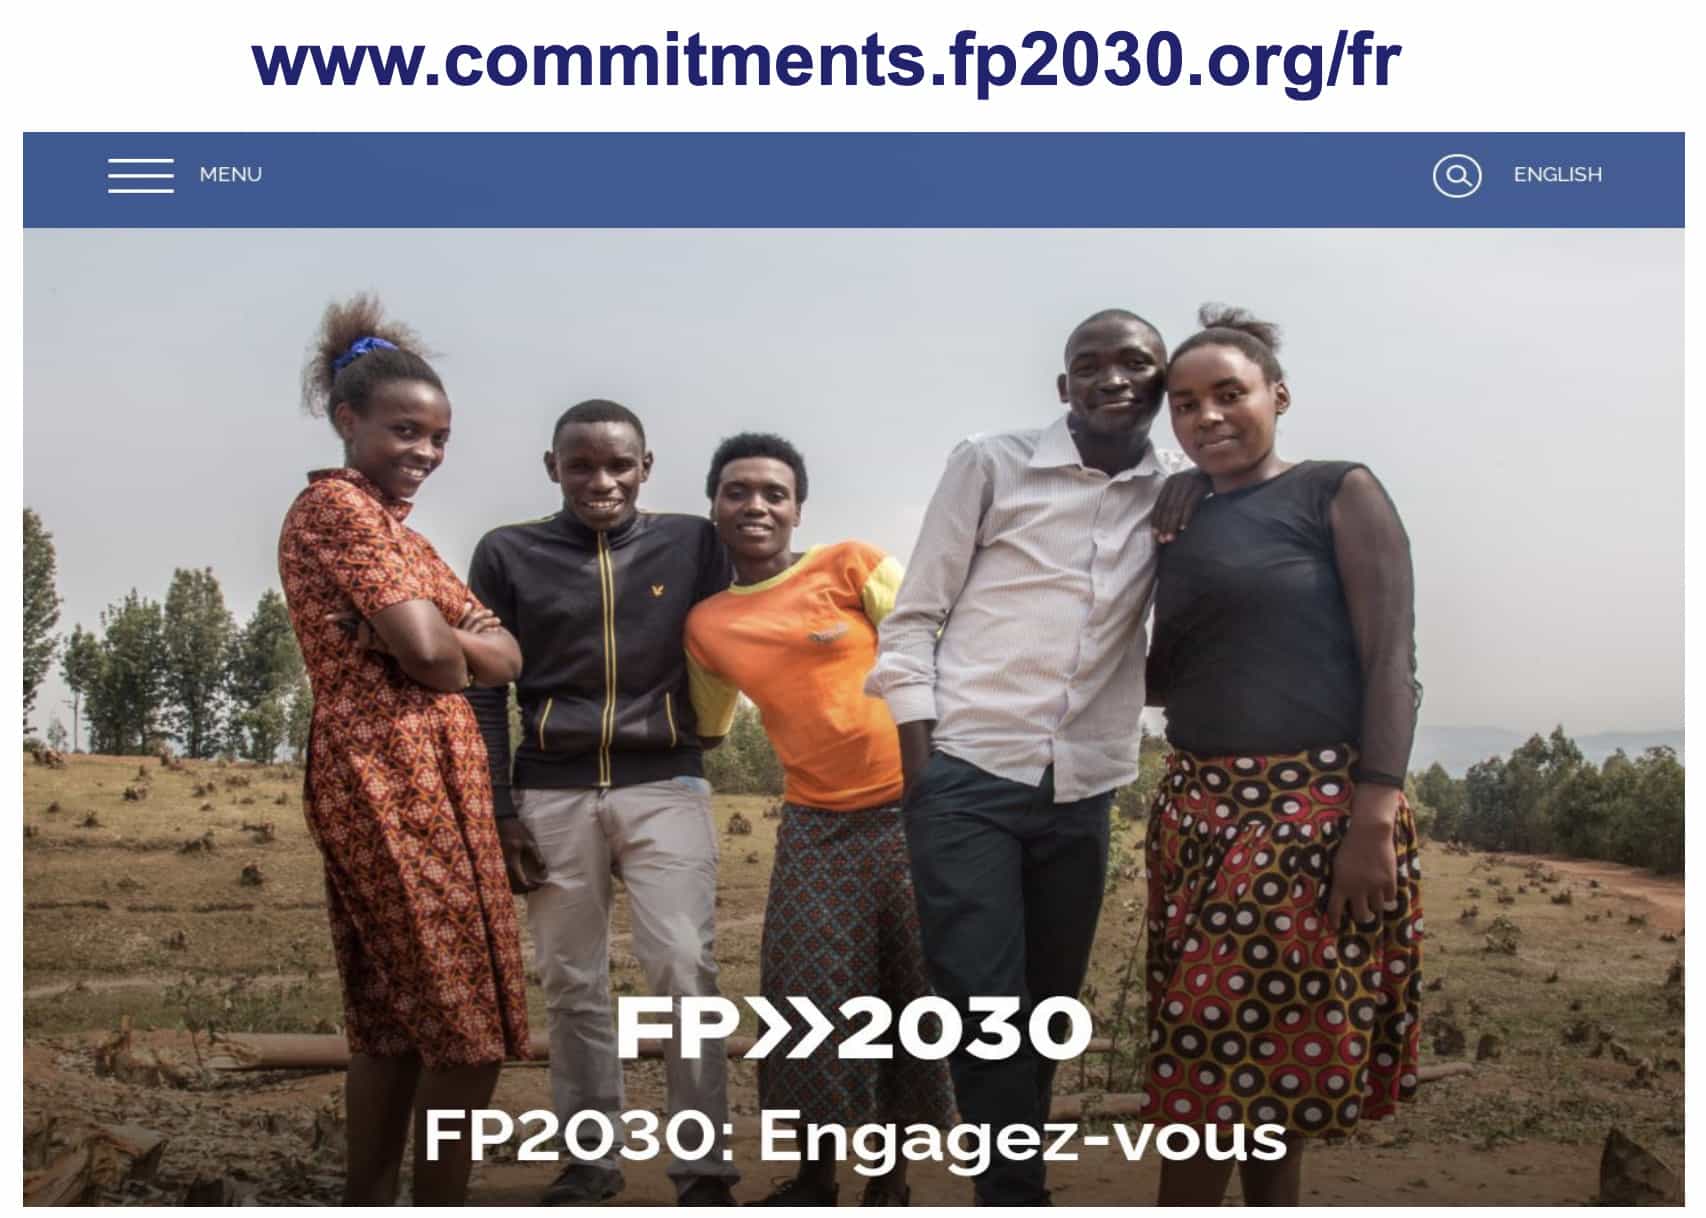 Dilly Severin speaks during the “Introduction to FP2030 Commitments” webinar